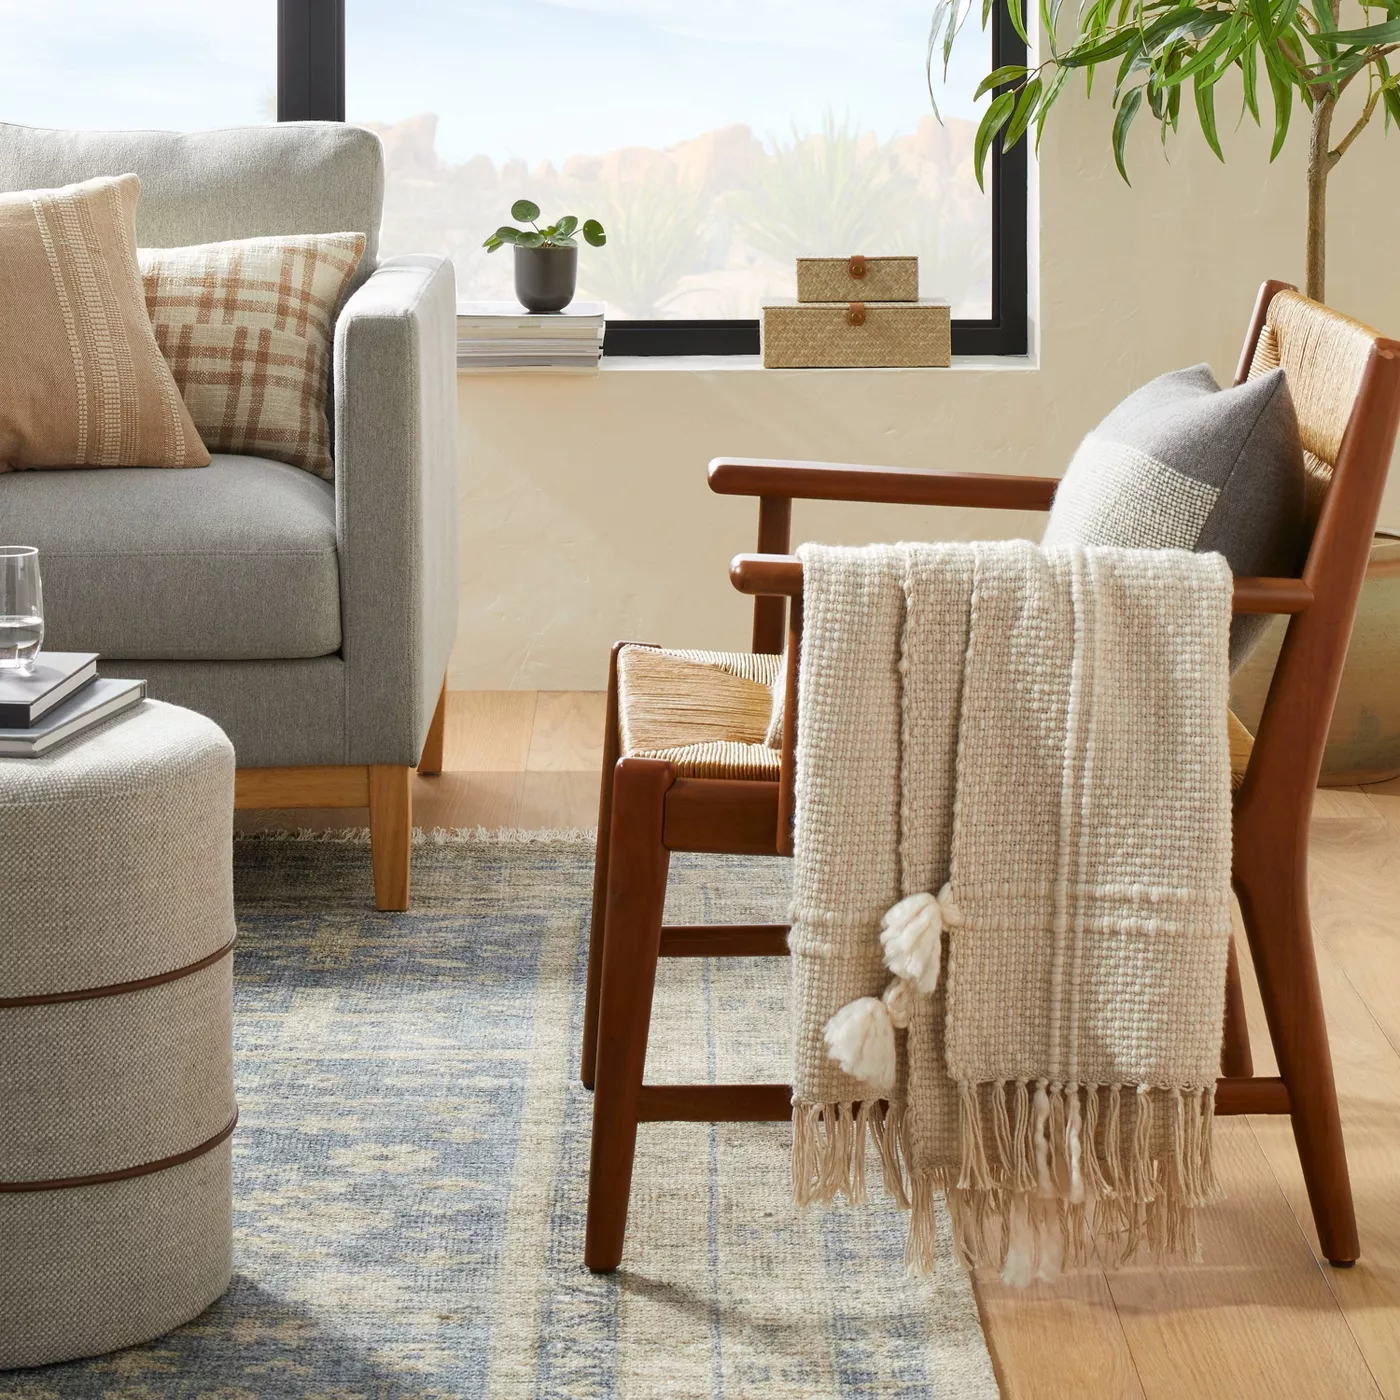 The new Studio McGee Target Fall 2021 Collection - all my favorites - jane at home - living room ideas